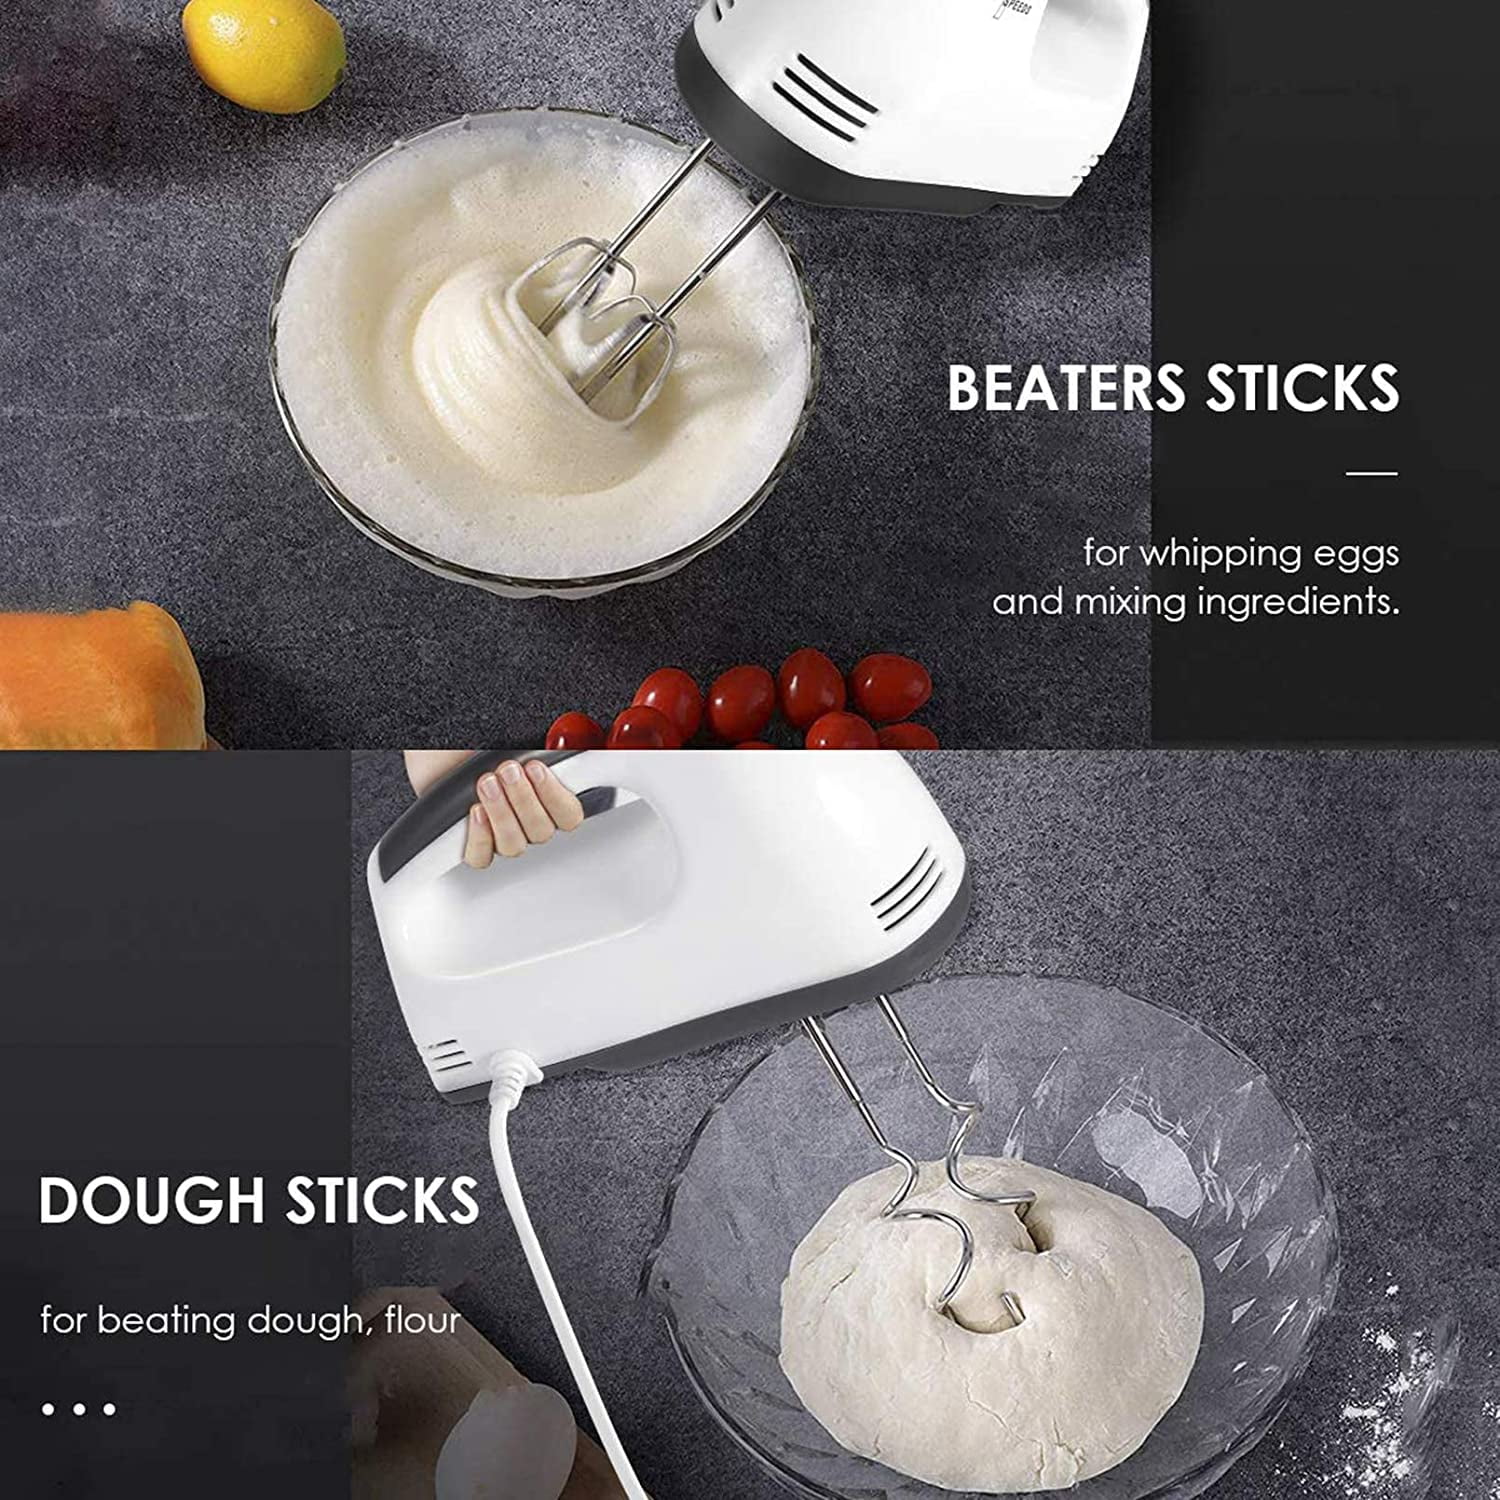 SELINGY Rechargeable Cordless Hand Mixer Electric - 7 Speed Electric Handheld Mixer with Storage Base, Digital Screen, 4 Stainless Steel